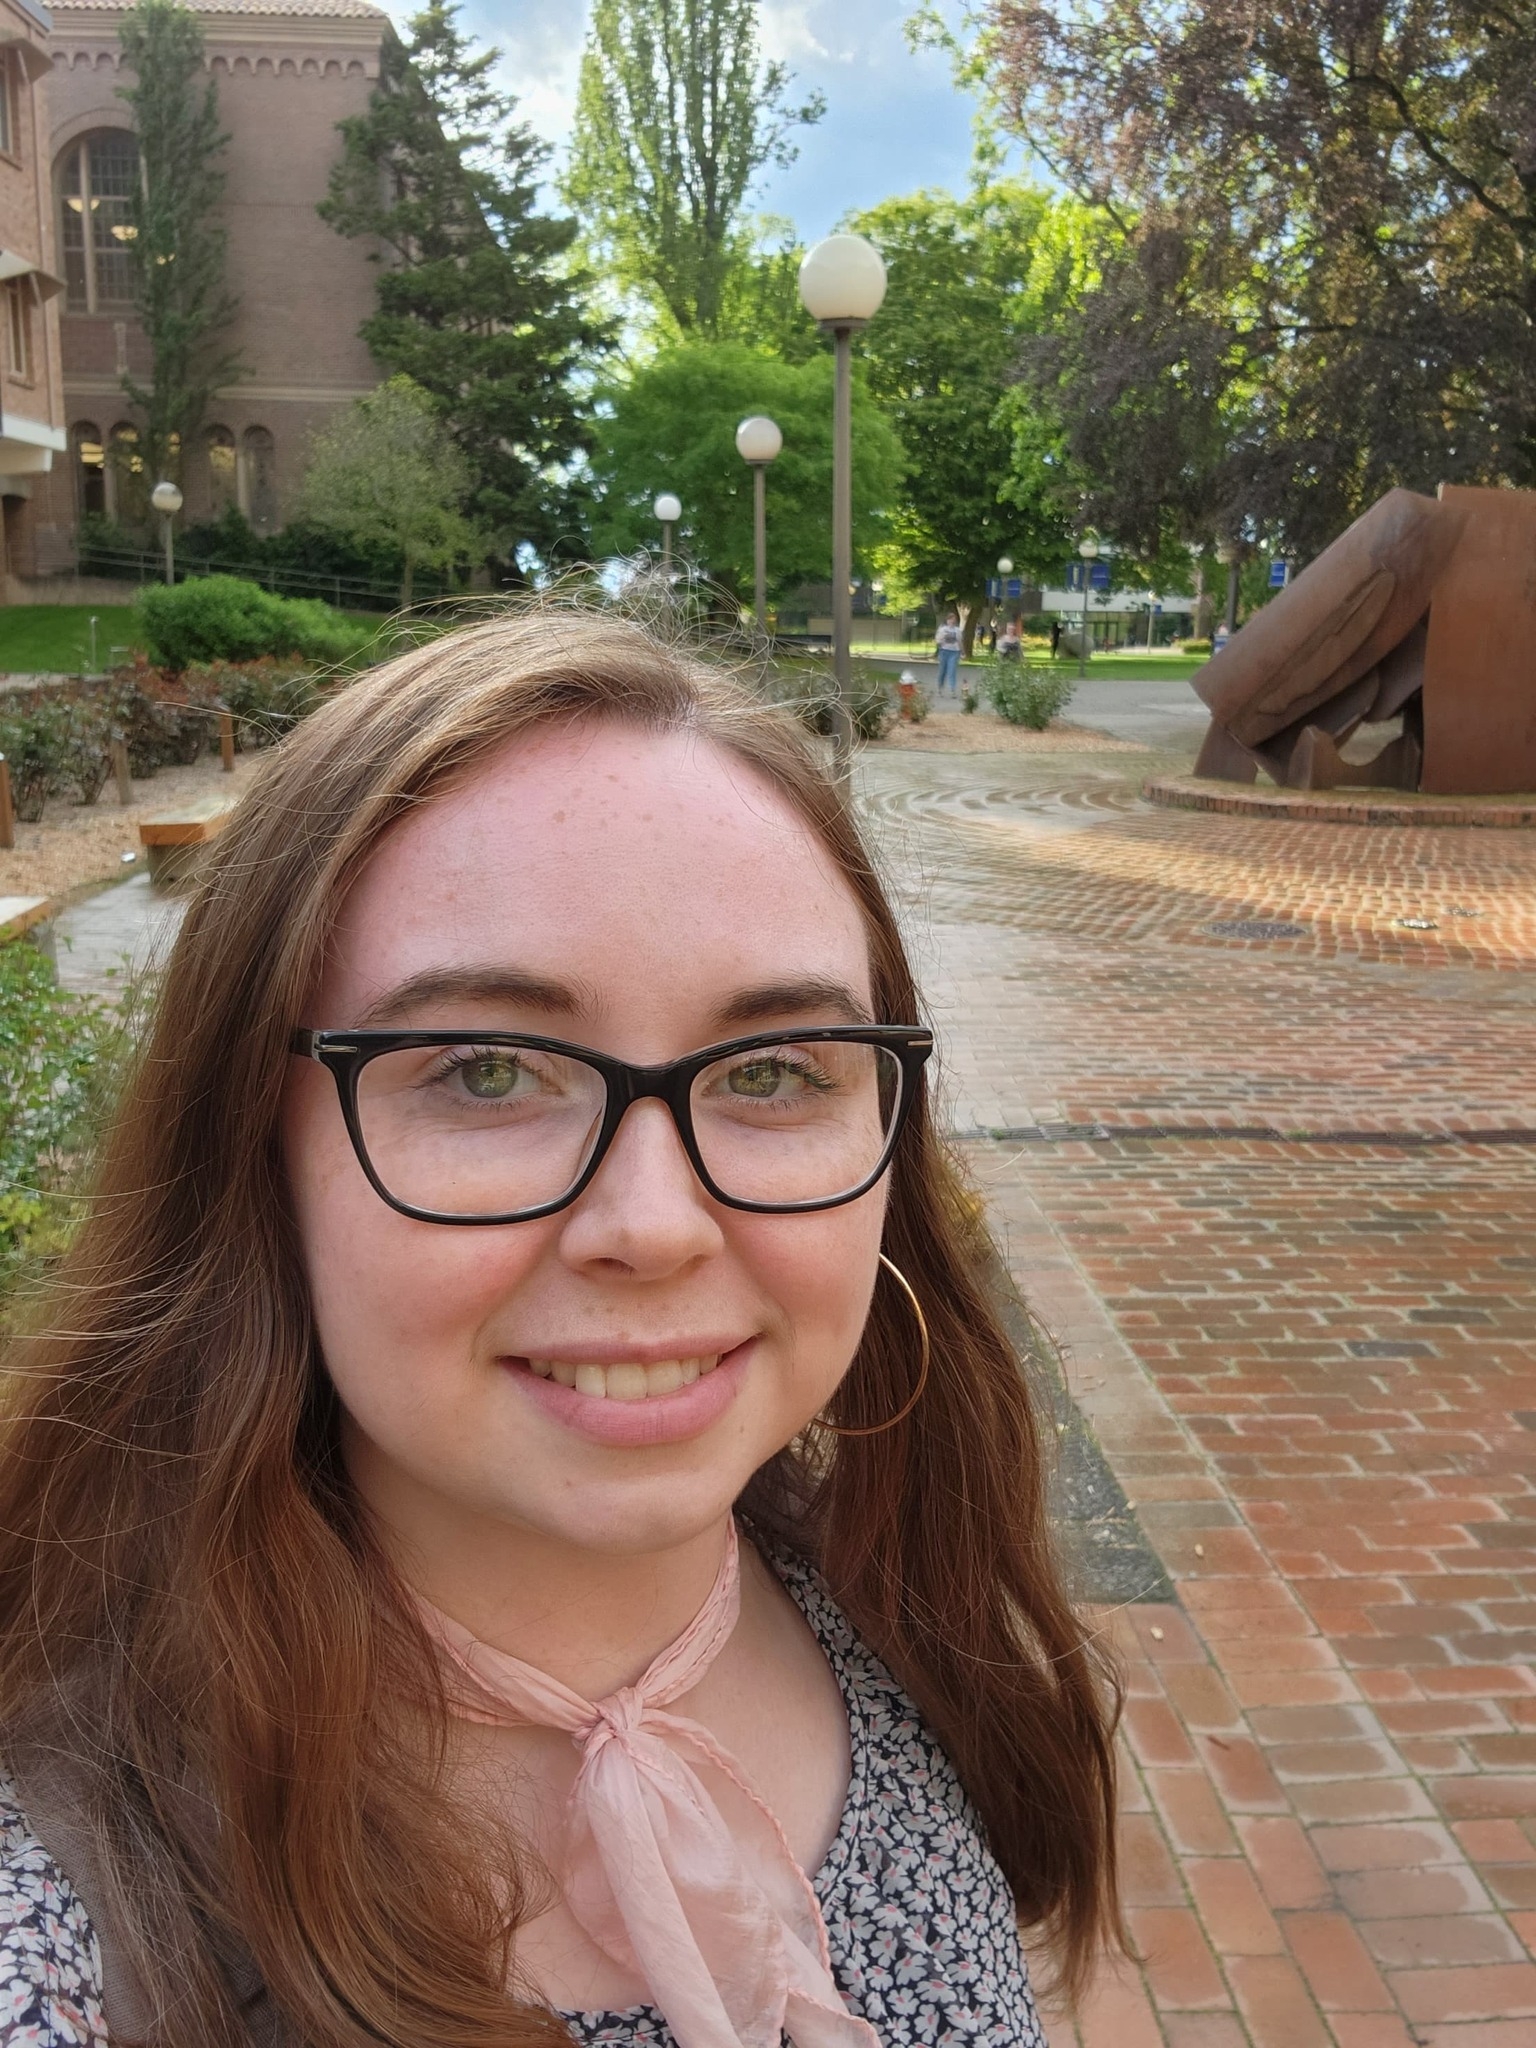 WWU outstanding graduate student Caity Scott with a brick pathway and an abstract iron sculpture in the background